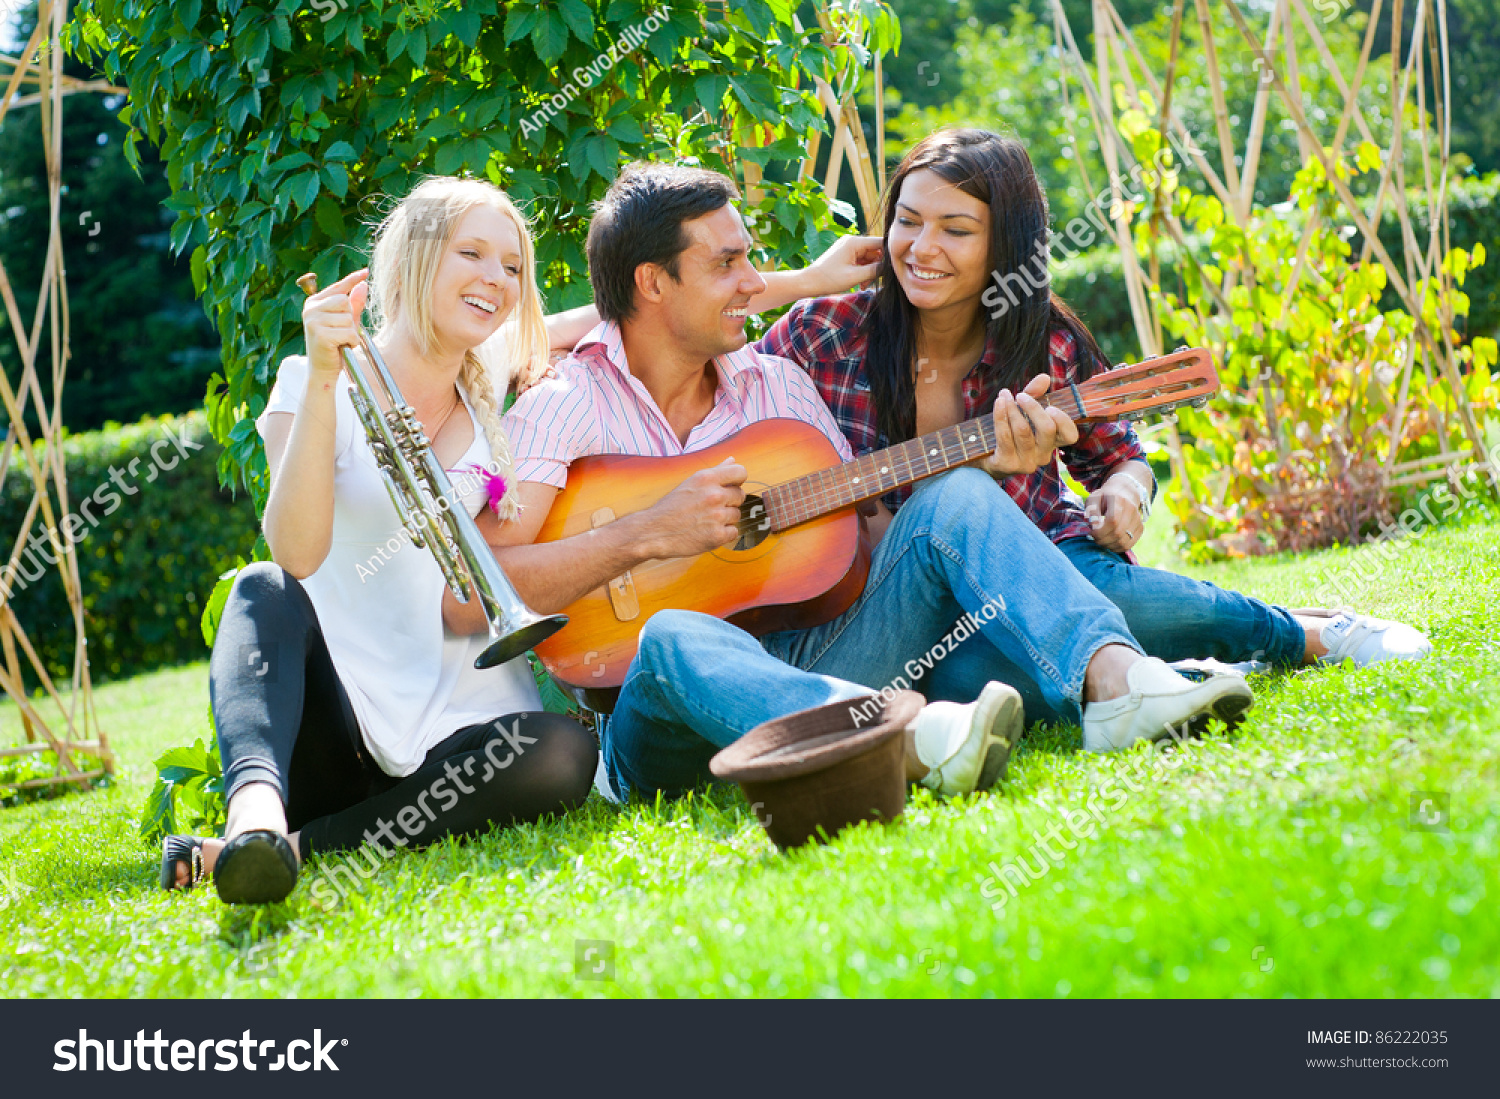 Young friends play the guitar and trumpet in the park #86222035